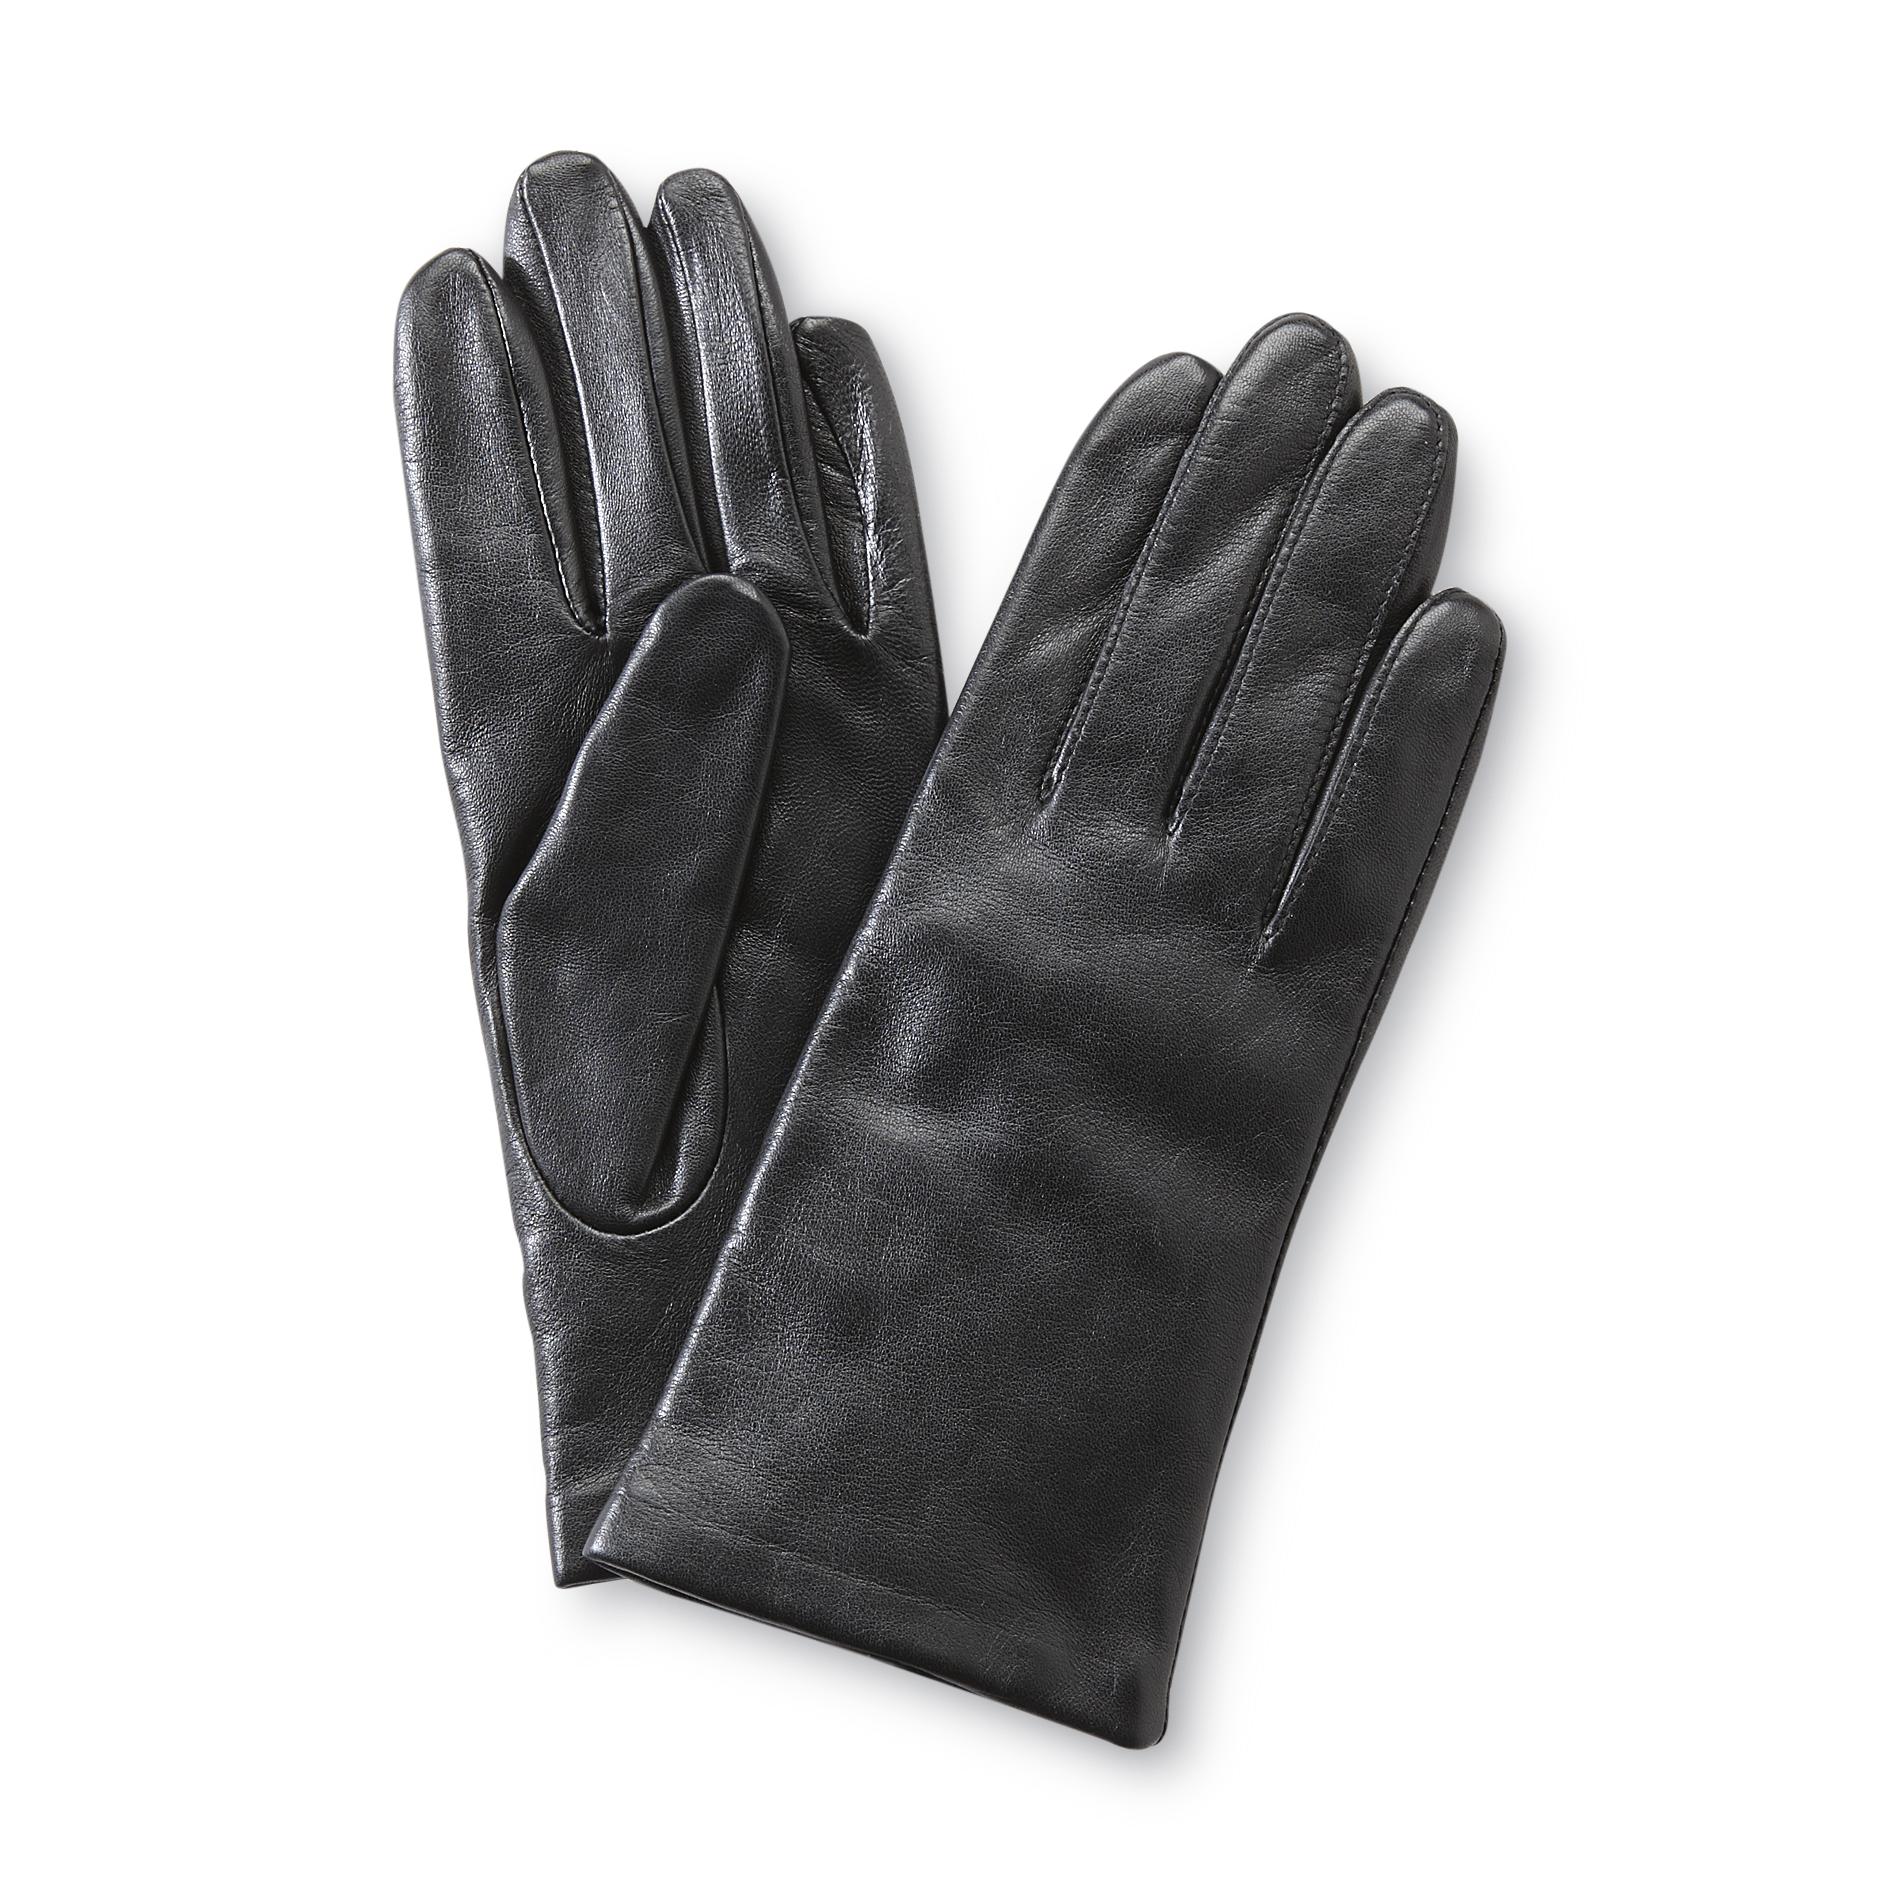 Jaclyn Smith Women's Lined Leather Gloves